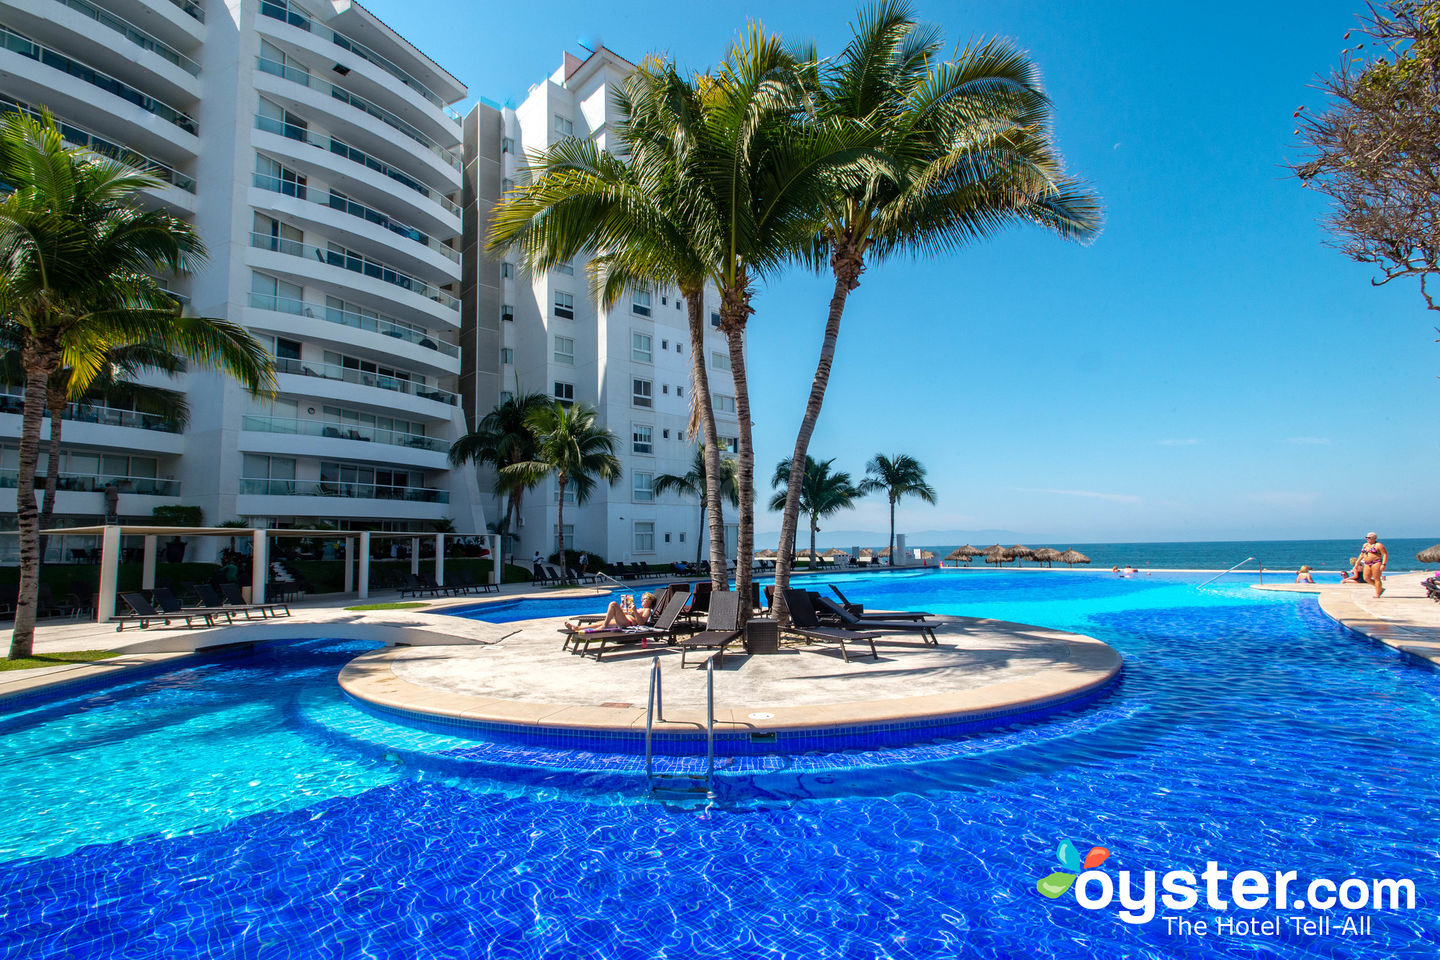 Dreams Villamagna Nuevo Vallarta Review: What To REALLY Expect If You Stay.